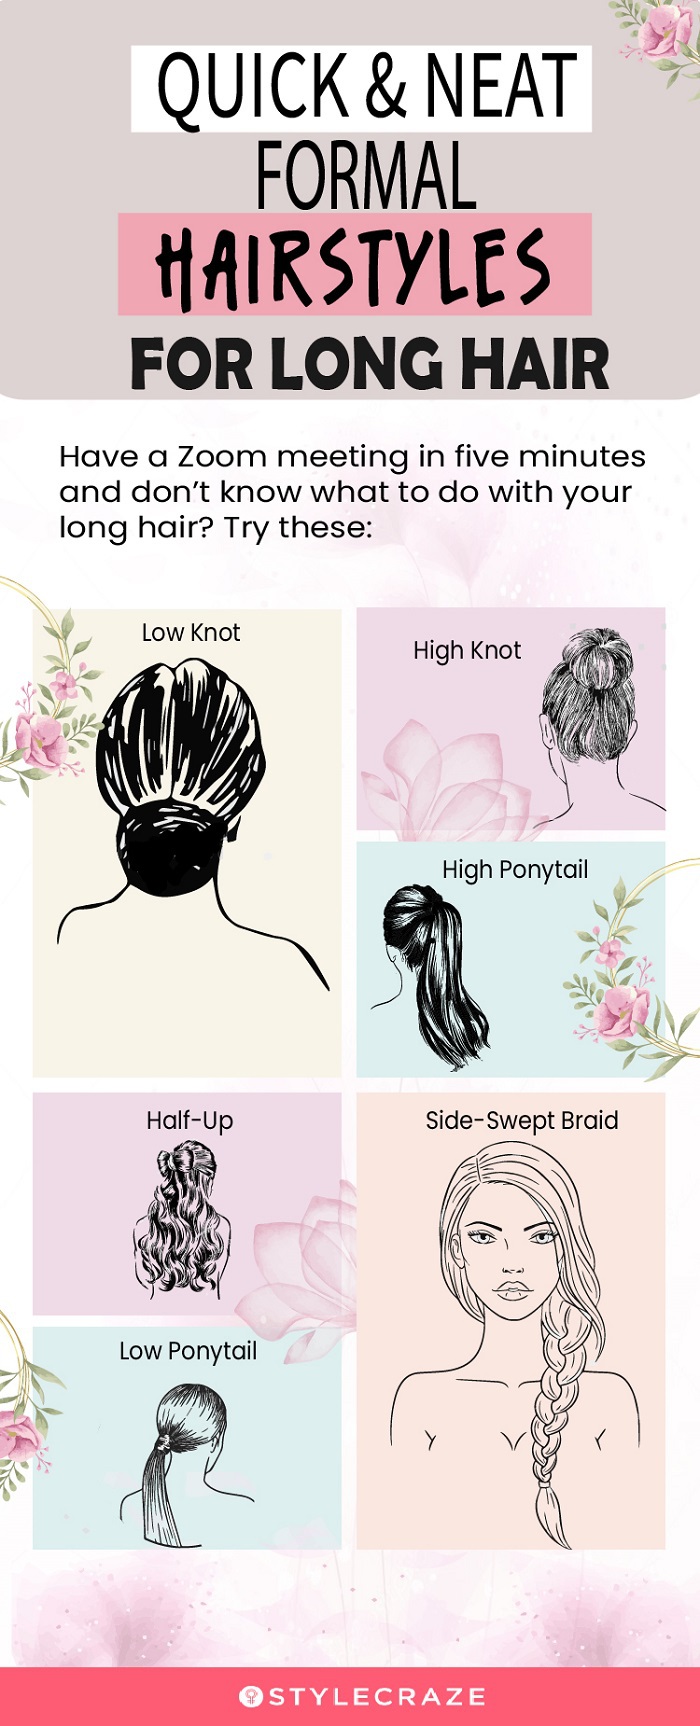 quick and neat formal hairstyles for long hair (infographic)